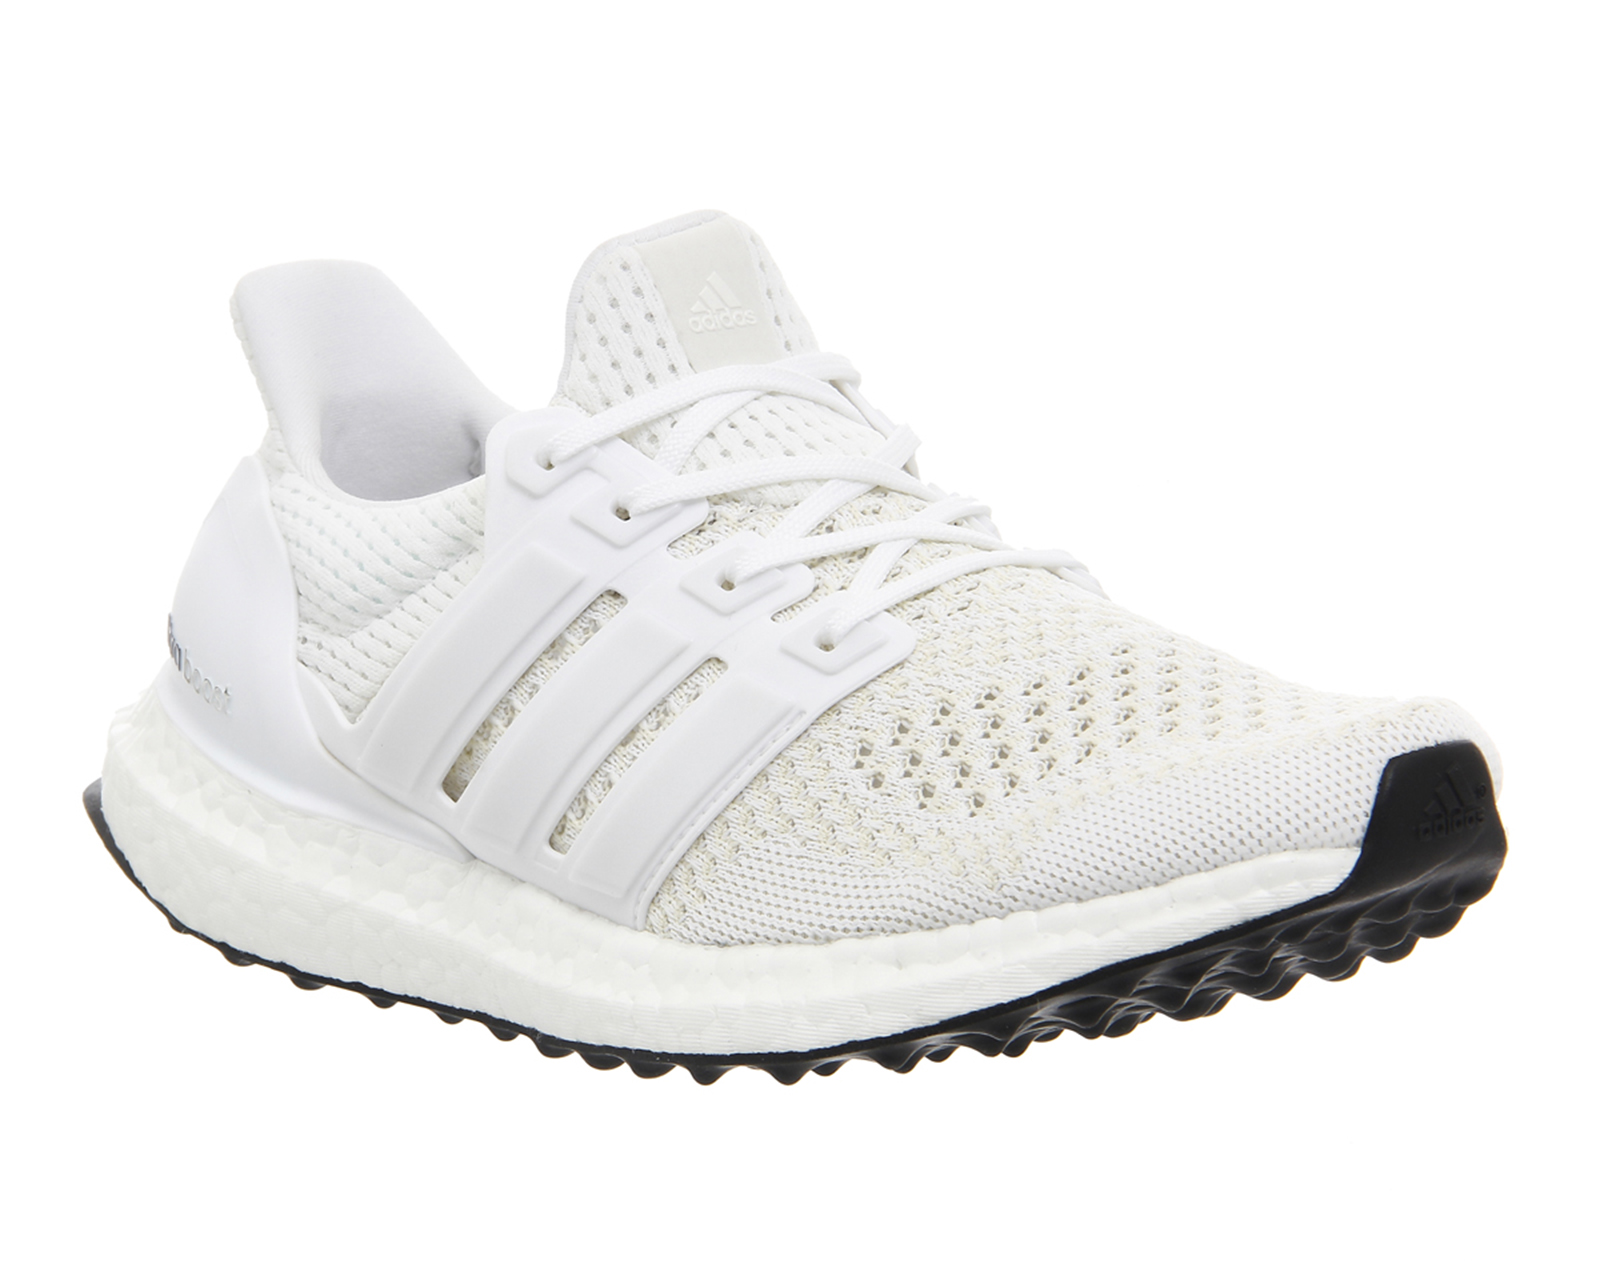 adidas Ultraboost Ultra Boost White Silver W - Hers trainers